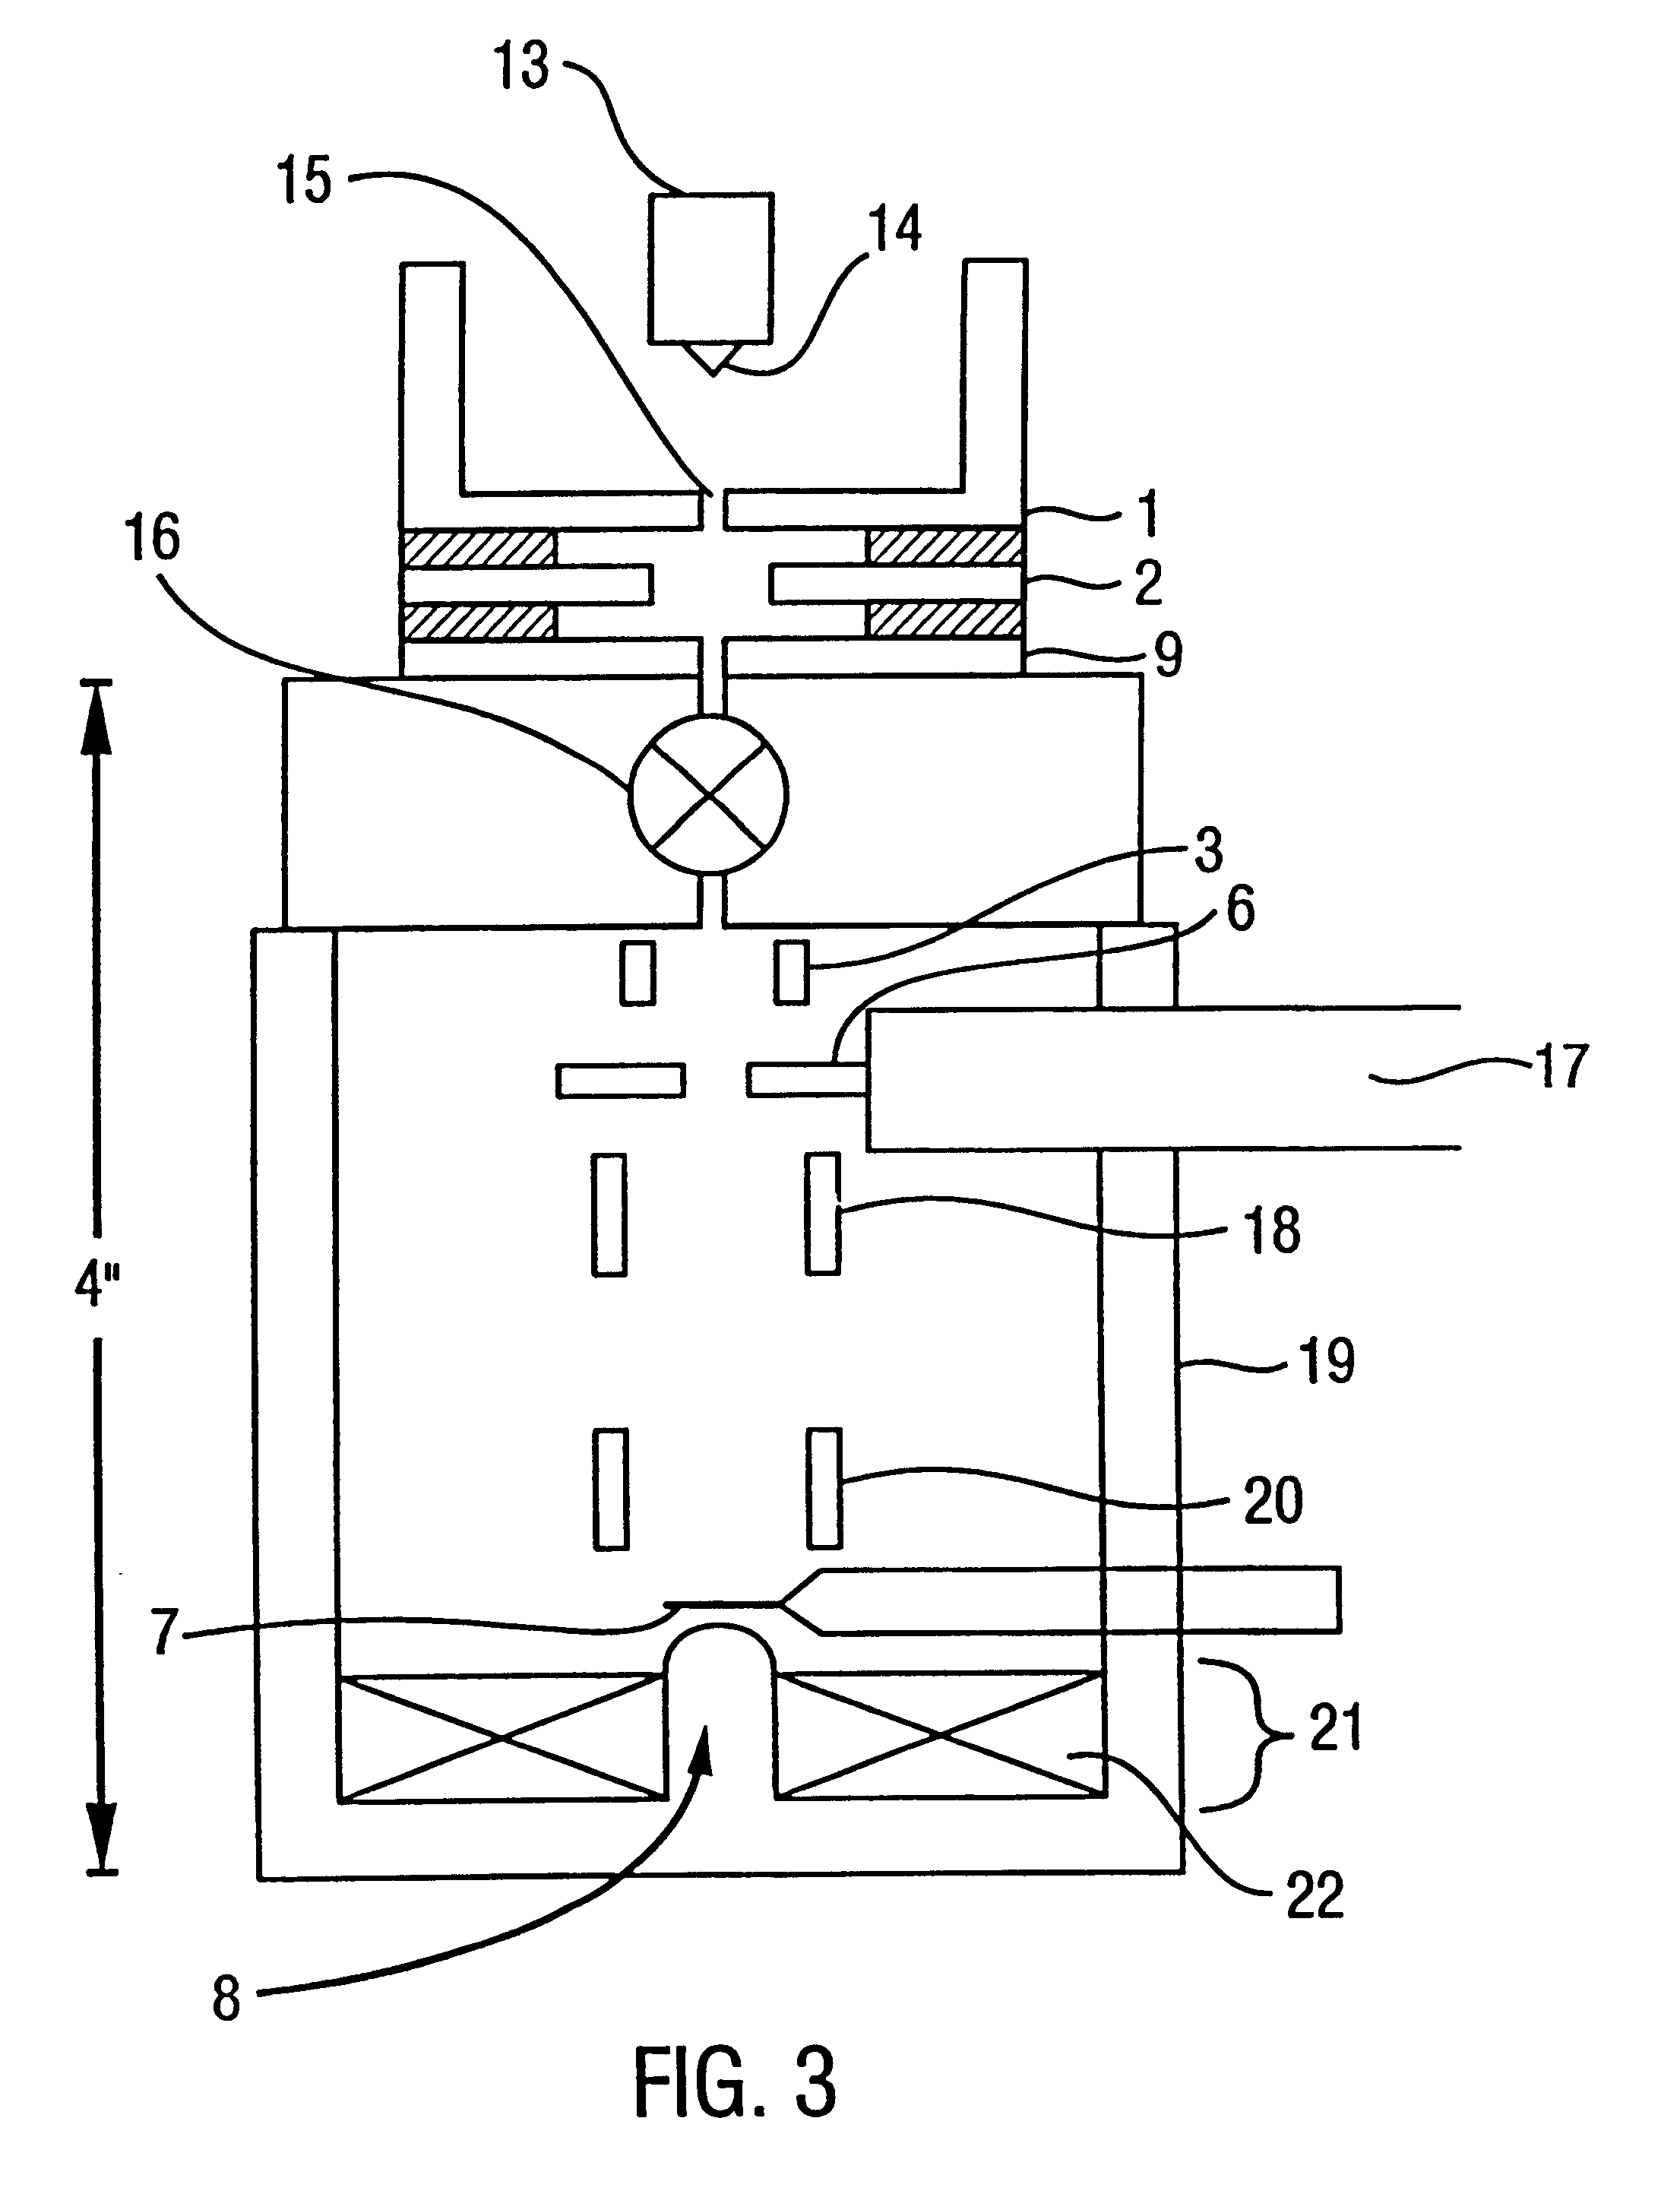 Magnetic lens apparatus for use in high-resolution scanning electron microscopes and lithographic processes